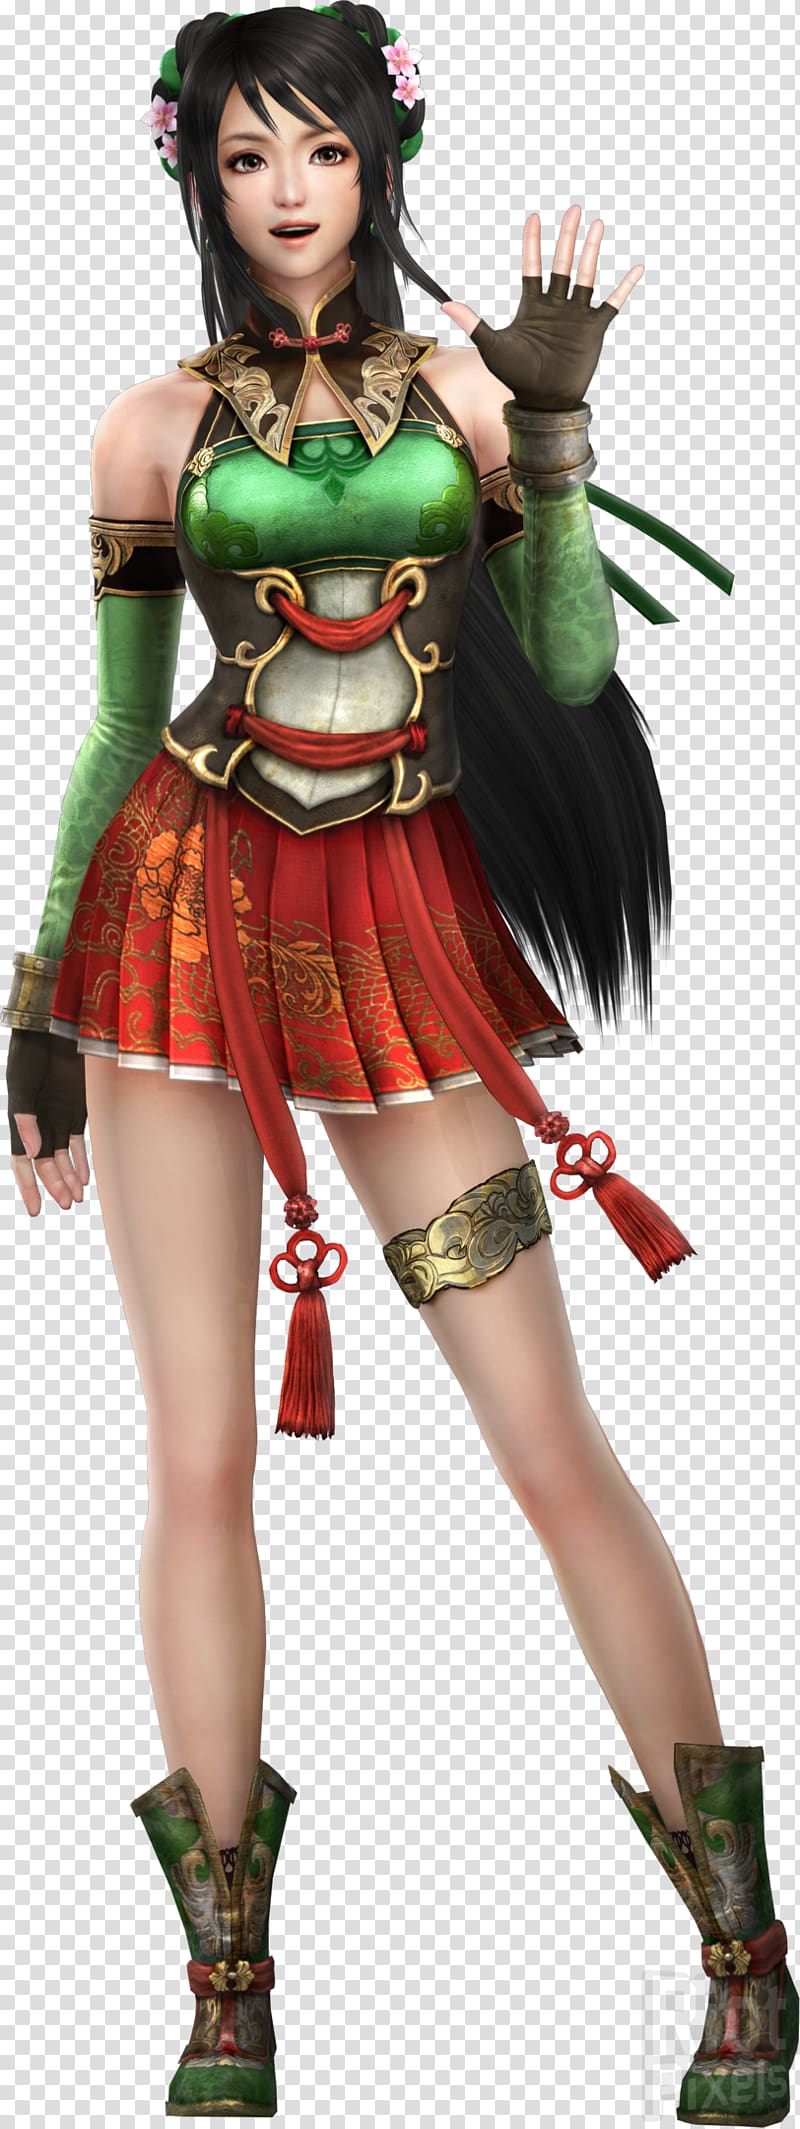 Lady Guan Dynasty Warriors 8 Dynasty Warriors 7 Dynasty Warriors 9 Diaochan, others transparent background PNG clipart